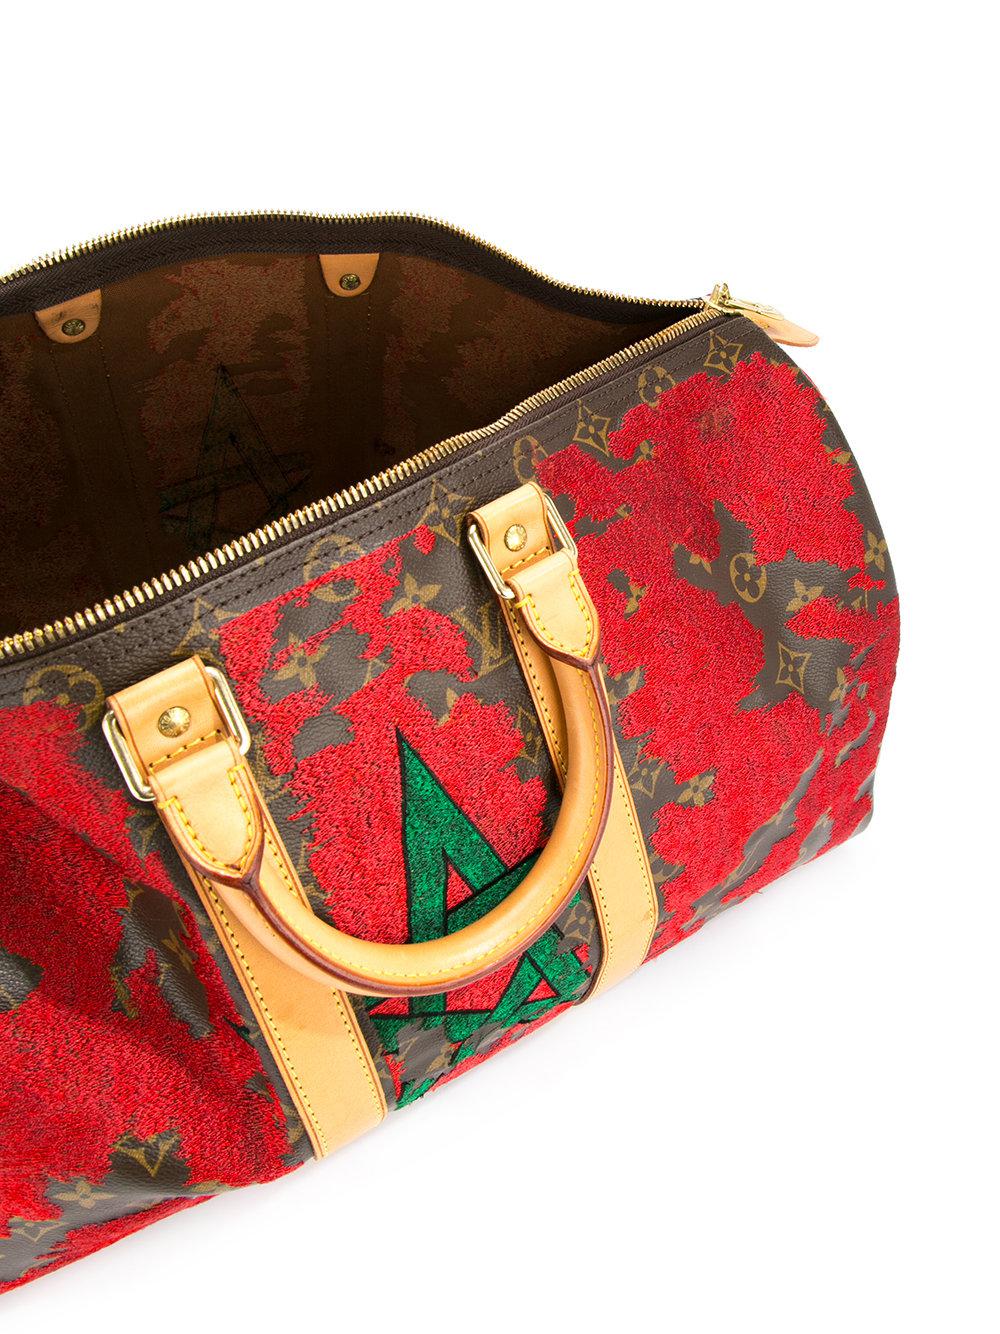 Jay Ahr Canvas Morocco Flag Vintage Louis Vuitton Keepall in Red - Lyst